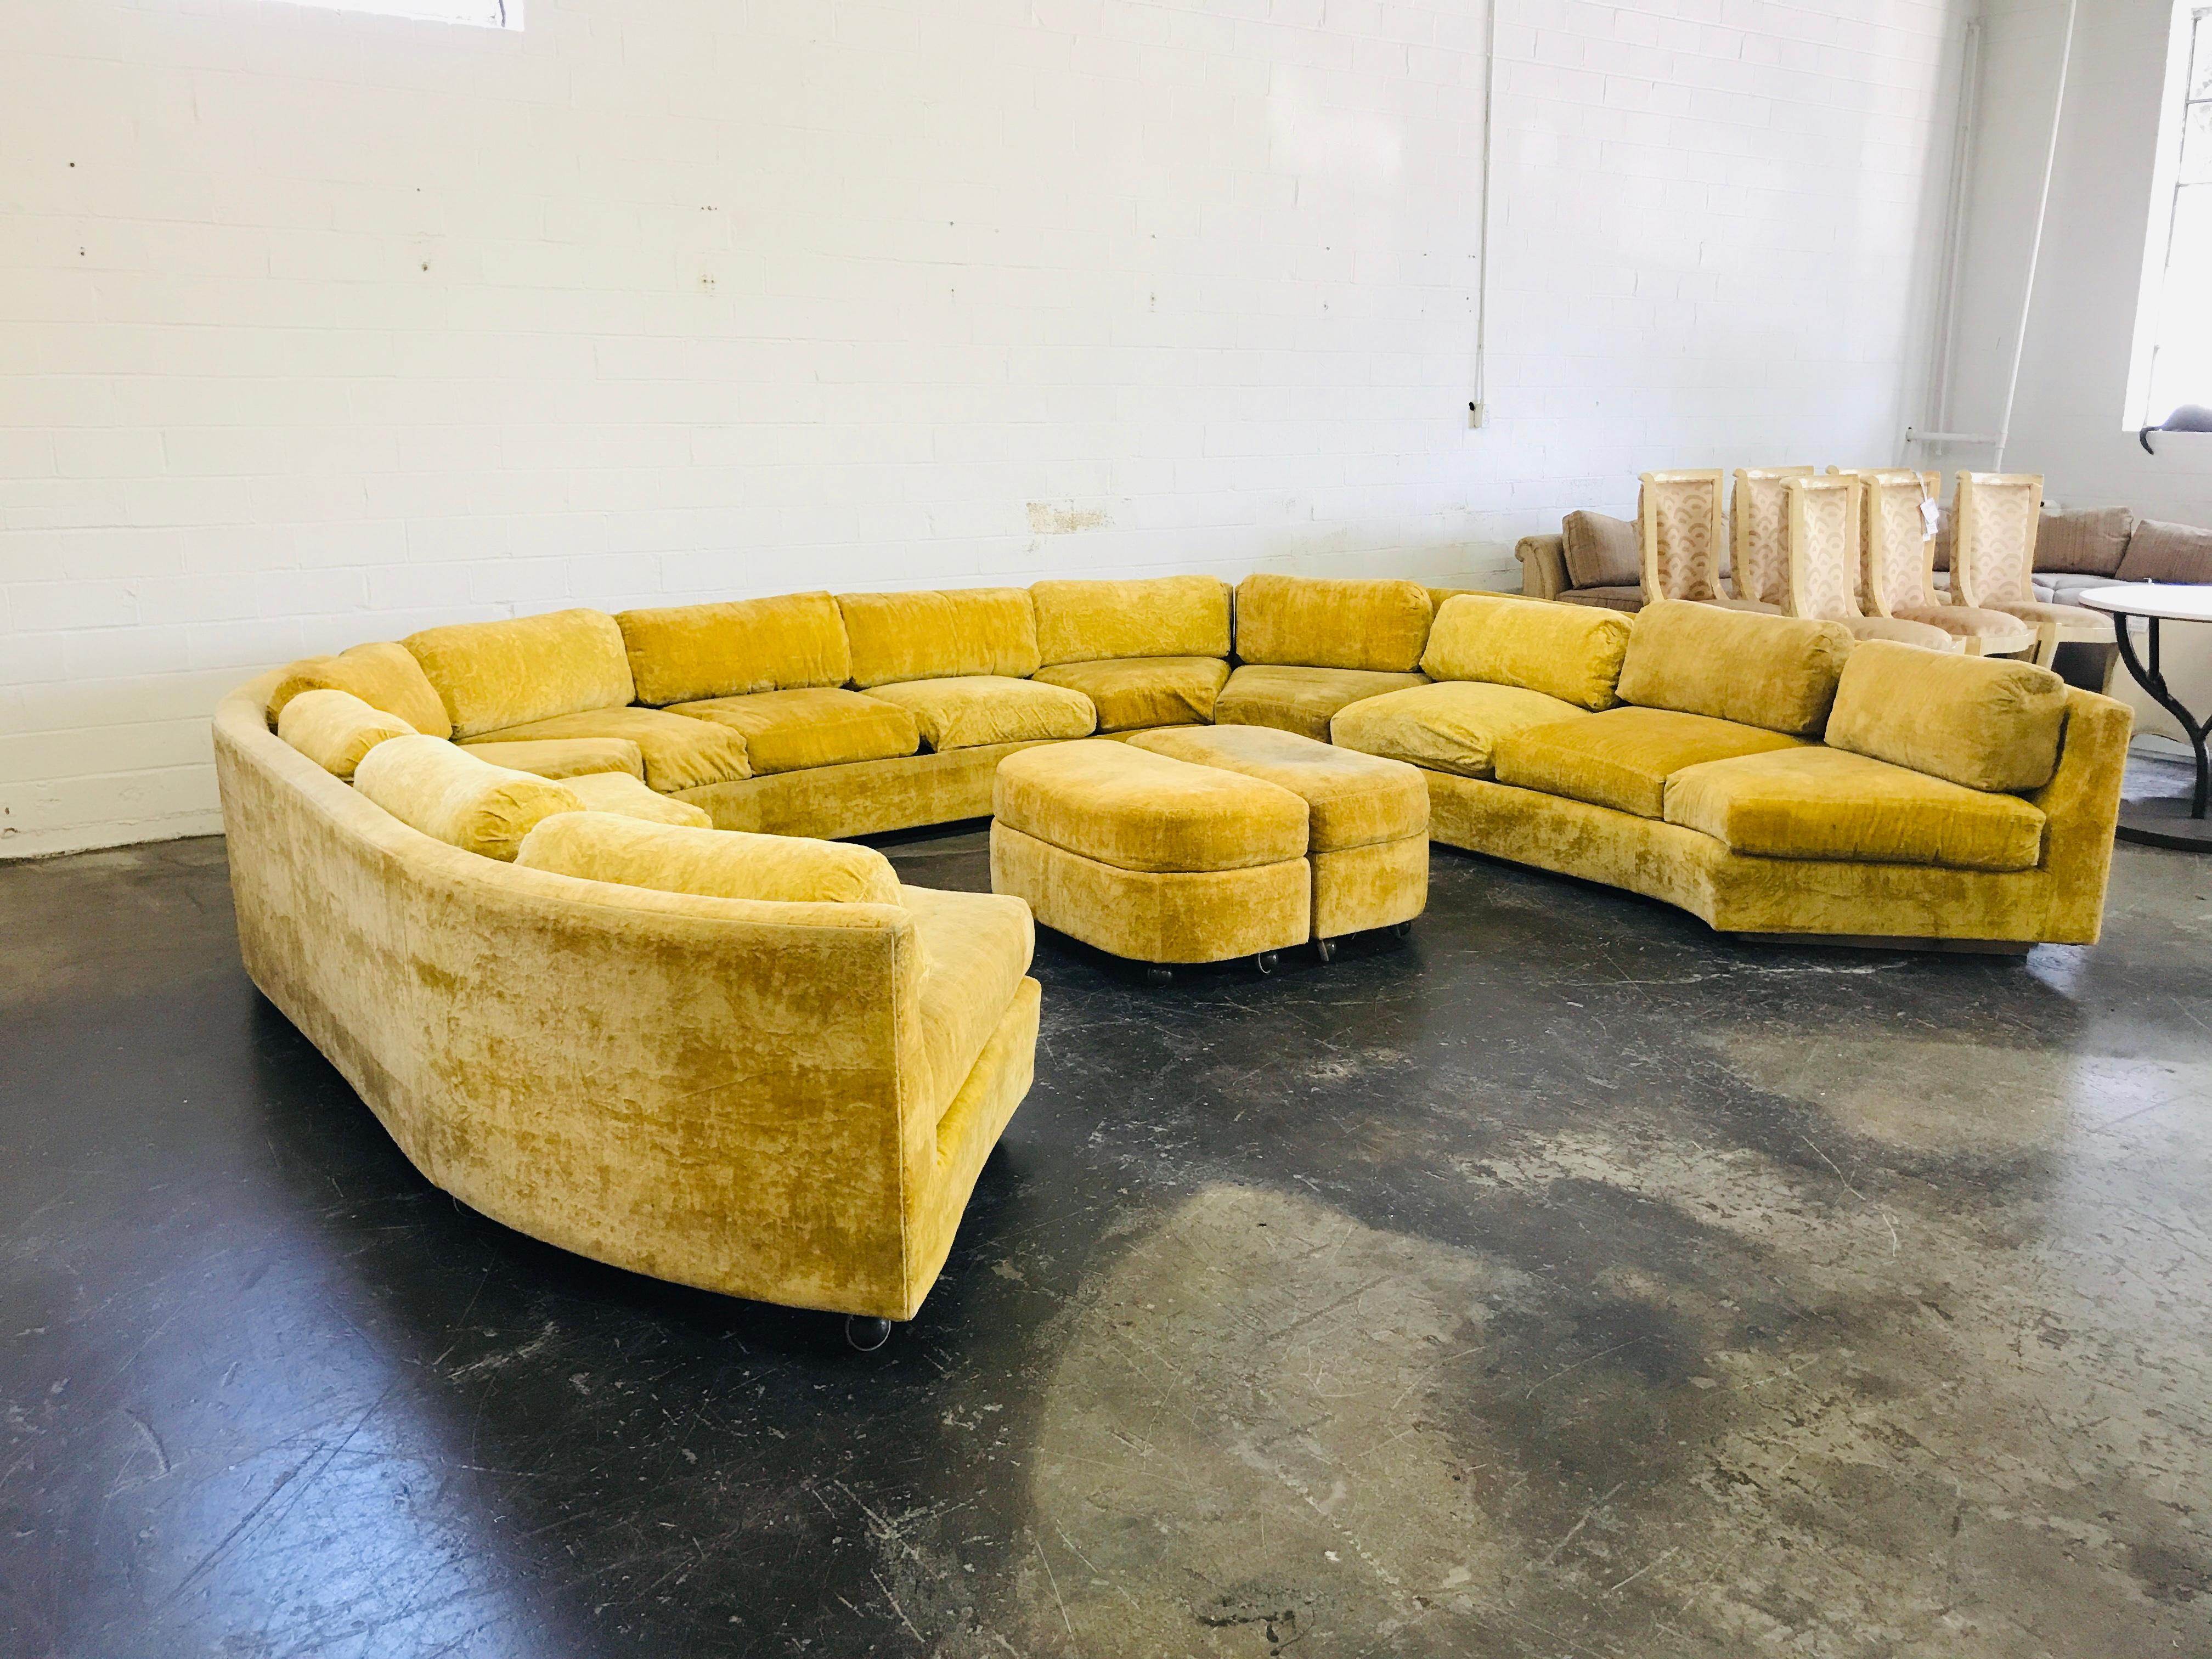 This piece has quite an interesting history--it was newly purchased in 1972 and in the home of our (Texas') two time Governor Clements. 
The individual pieces are 10 feet each and we would highly recommend new foam cushions and upholstery for this